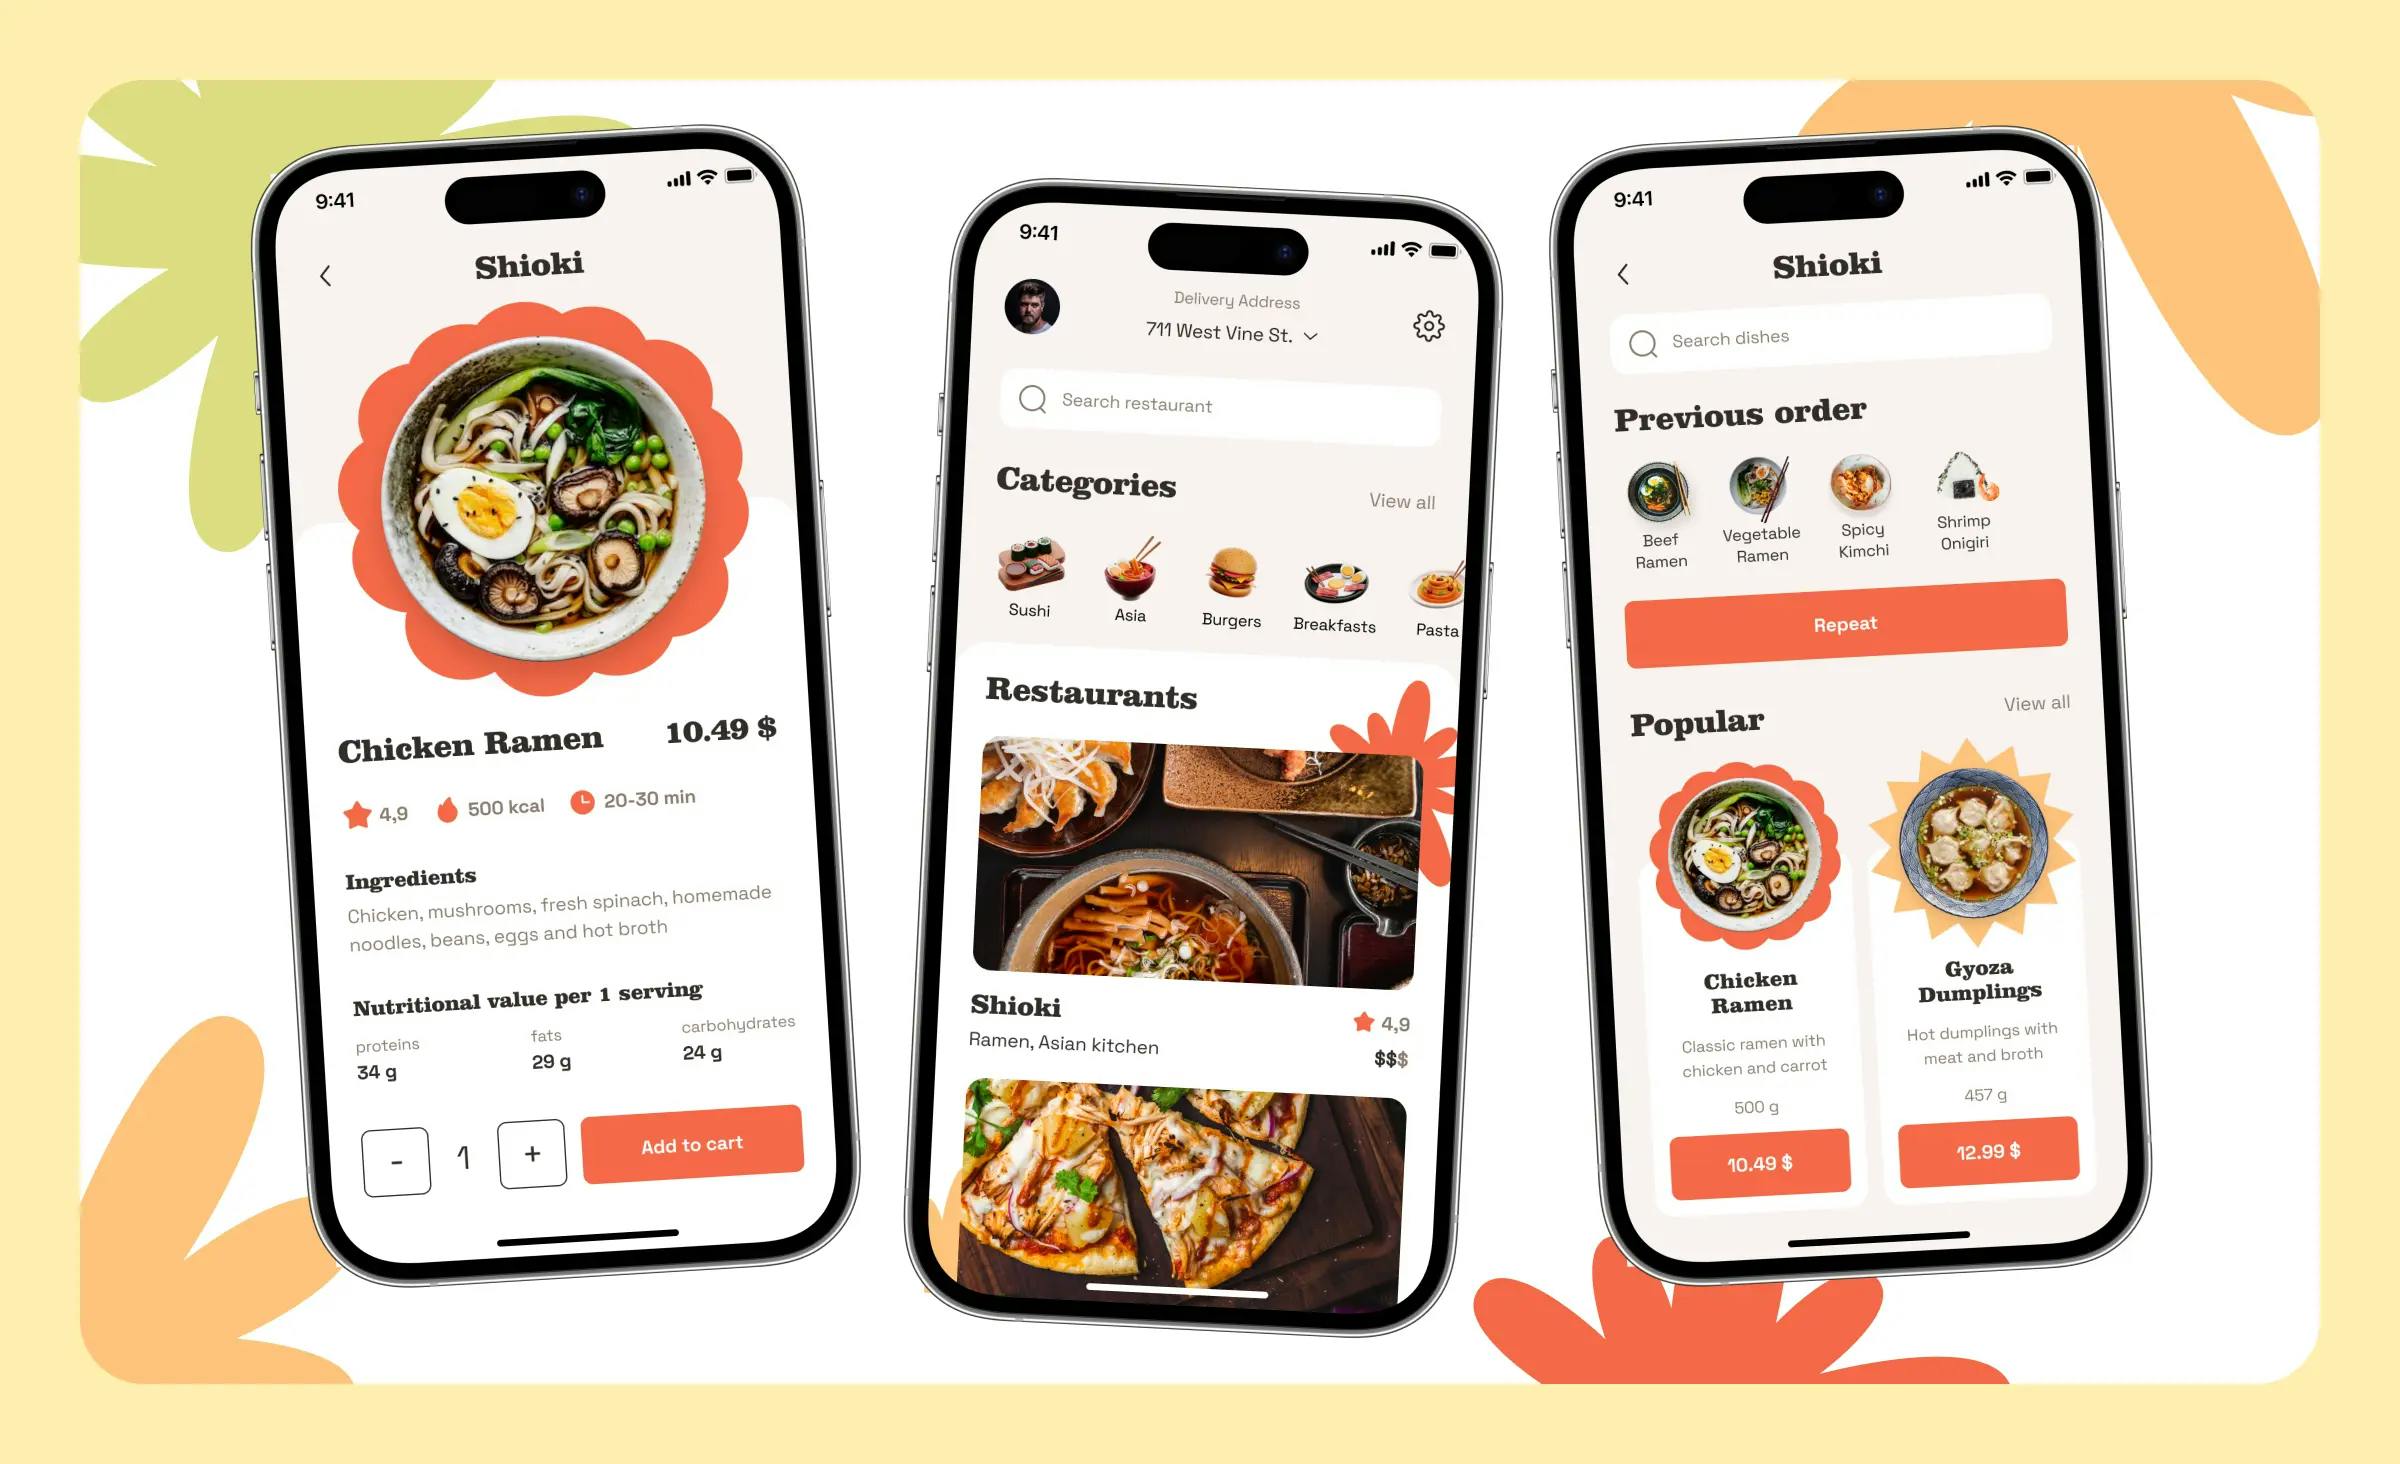 The image is a food delivery app design concept, created by the Ronas IT design team, displaying three screens of the application. The first screen presents a dish description, the second shows categories along with a list of restaurants, and the third represents a user's previous orders and favorite meals.